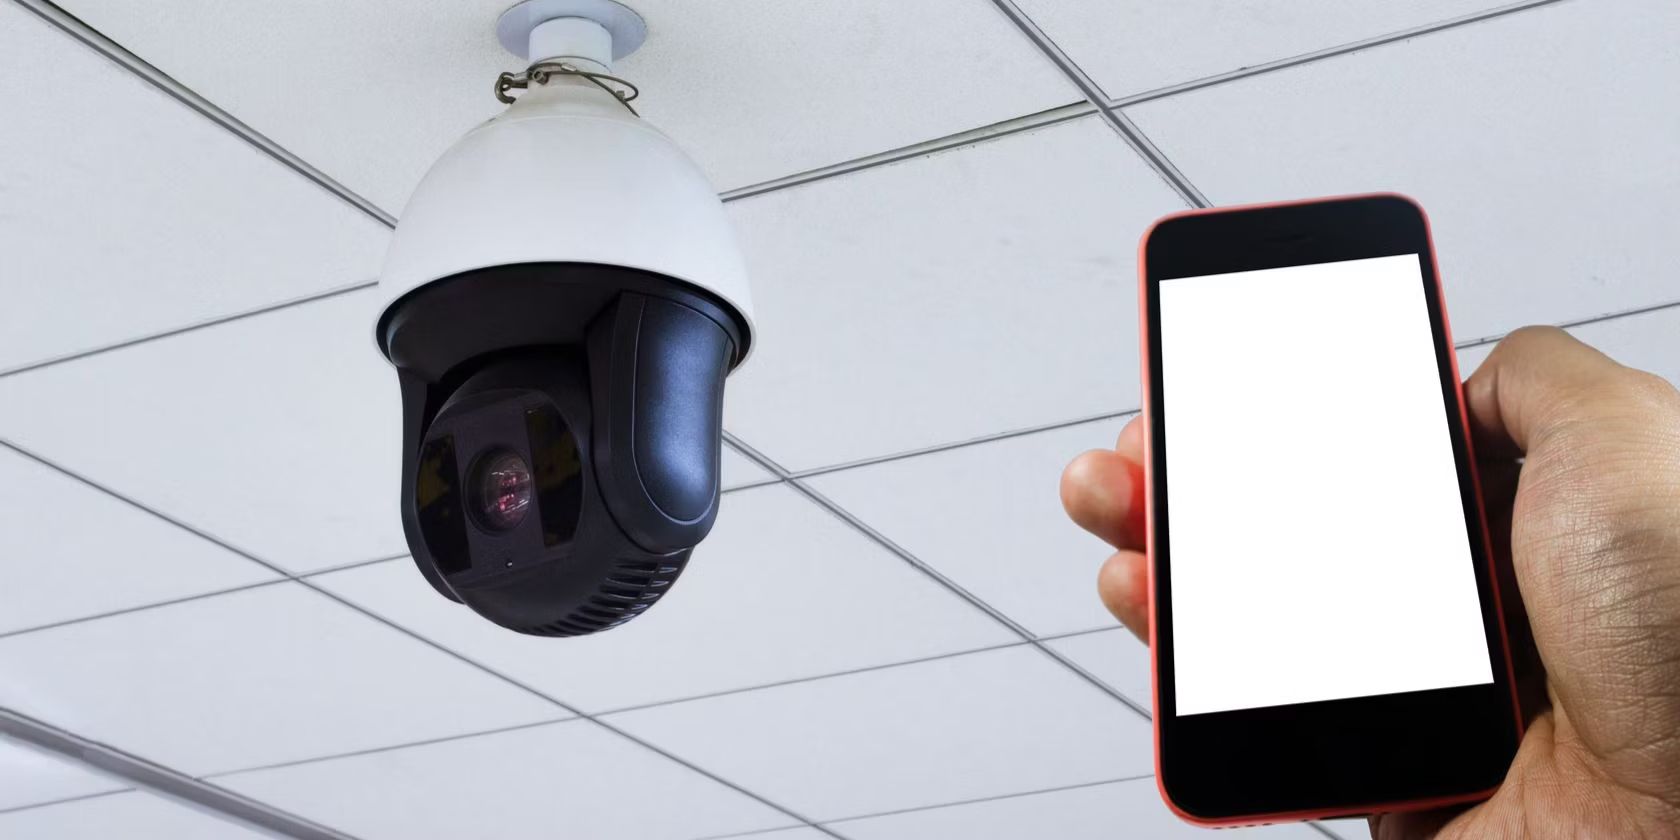 How To View My Security Cameras On My Phone